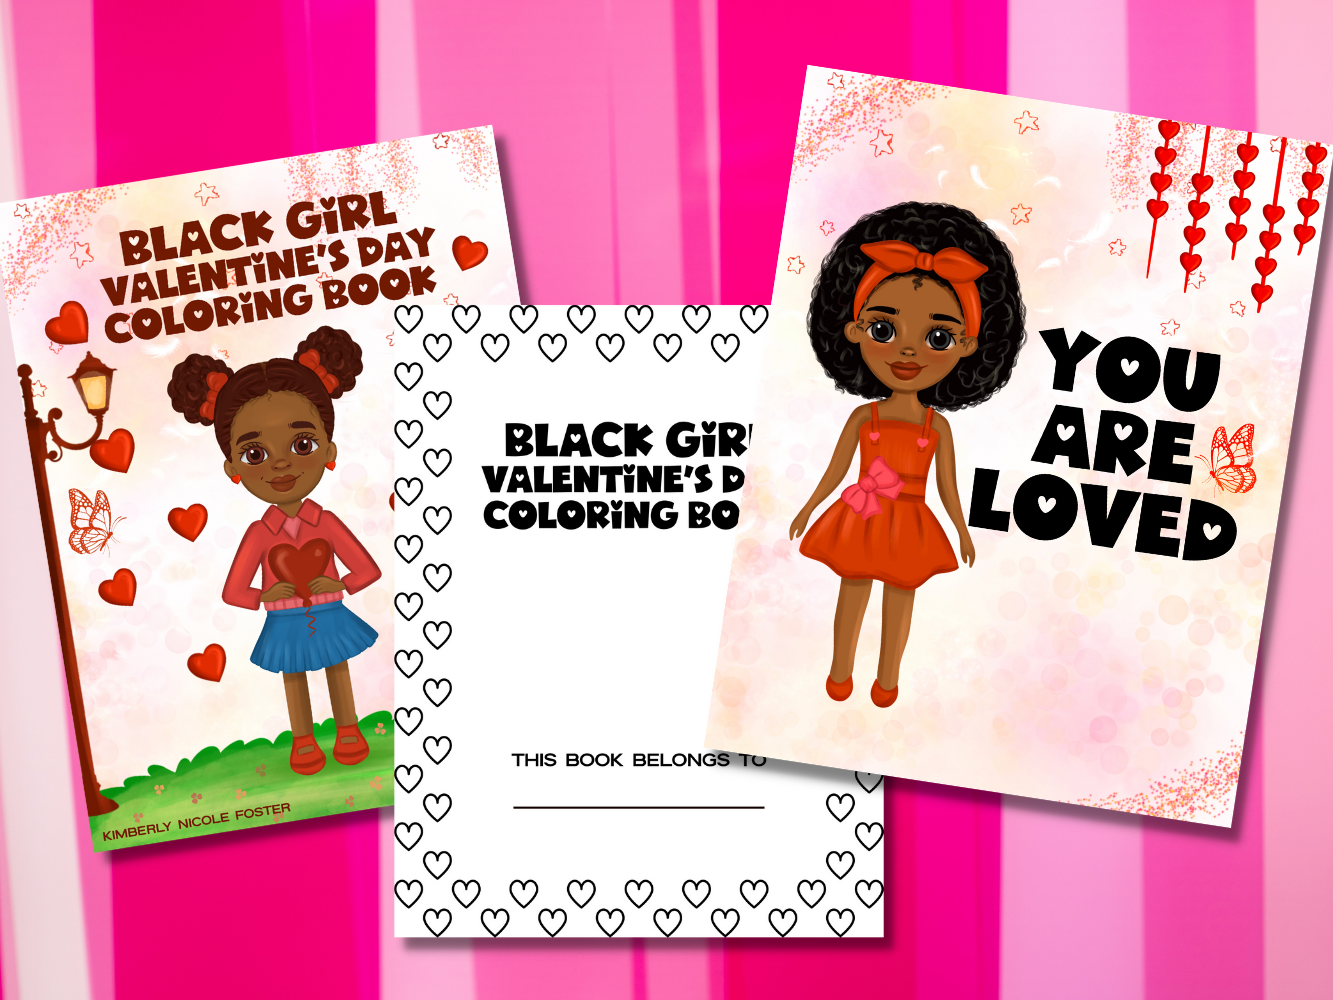 Black Girl Valentine's Day Coloring Book (Physical Copy)